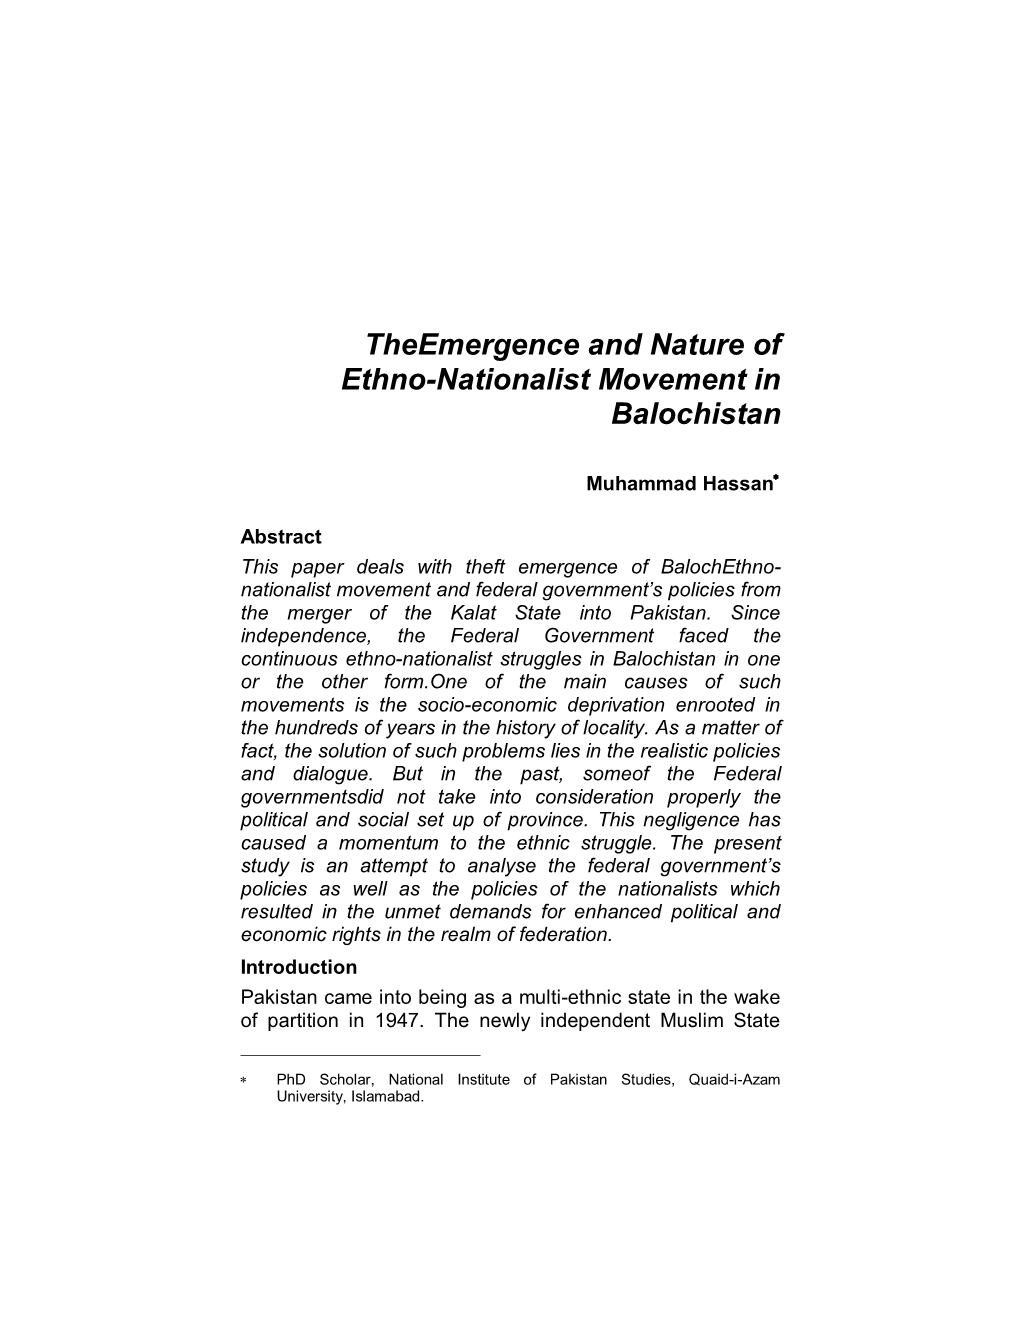 Theemergence and Nature of Ethno-Nationalist Movement in Balochistan